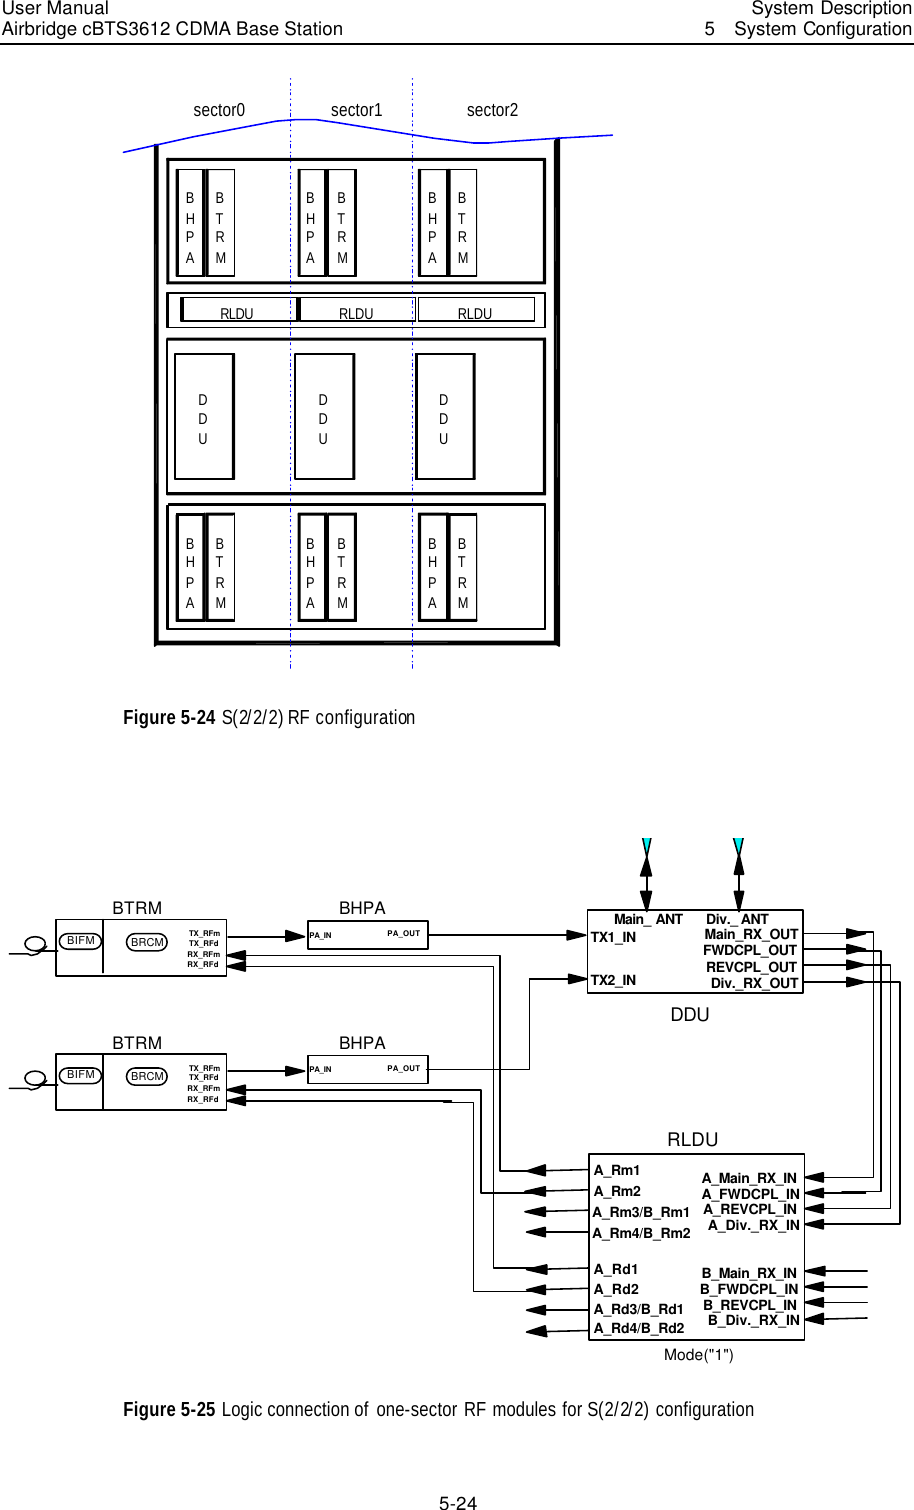 User Manual Airbridge cBTS3612 CDMA Base Station   System Description5  System Configuration 5-24 DDUBHPABTRMRLDUDDUDDUBHPABTRMBHPABTRMRLDU RLDUsector0 sector2sector1BHPABTRMBHPABTRMBHPABTRM Figure 5-24 S(2/2/2) RF configuration  BHPAPA_IN PA_OUT TX1_INMain_ ANT Div._ ANTMain_RX_OUTDiv._RX_OUTFWDCPL_OUTREVCPL_OUTDDUA_Main_RX_INA_Div._RX_INA_FWDCPL_INA_REVCPL_INB_Main_RX_INB_Div._RX_INB_FWDCPL_INB_REVCPL_INA_Rm1A_Rm2A_Rm3/B_Rm1A_Rm4/B_Rm2A_Rd1A_Rd2A_Rd3/B_Rd1A_Rd4/B_Rd2RLDUMode(&quot;1&quot;)BTRMTX_RFmRX_RFmRX_RFdBRCMBIFM TX_RFdTX2_INBHPAPA_IN PA_OUTBTRMTX_RFmRX_RFmRX_RFdBRCMBIFM TX_RFd Figure 5-25 Logic connection of  one-sector  RF modules for S(2/2/2) configuration 